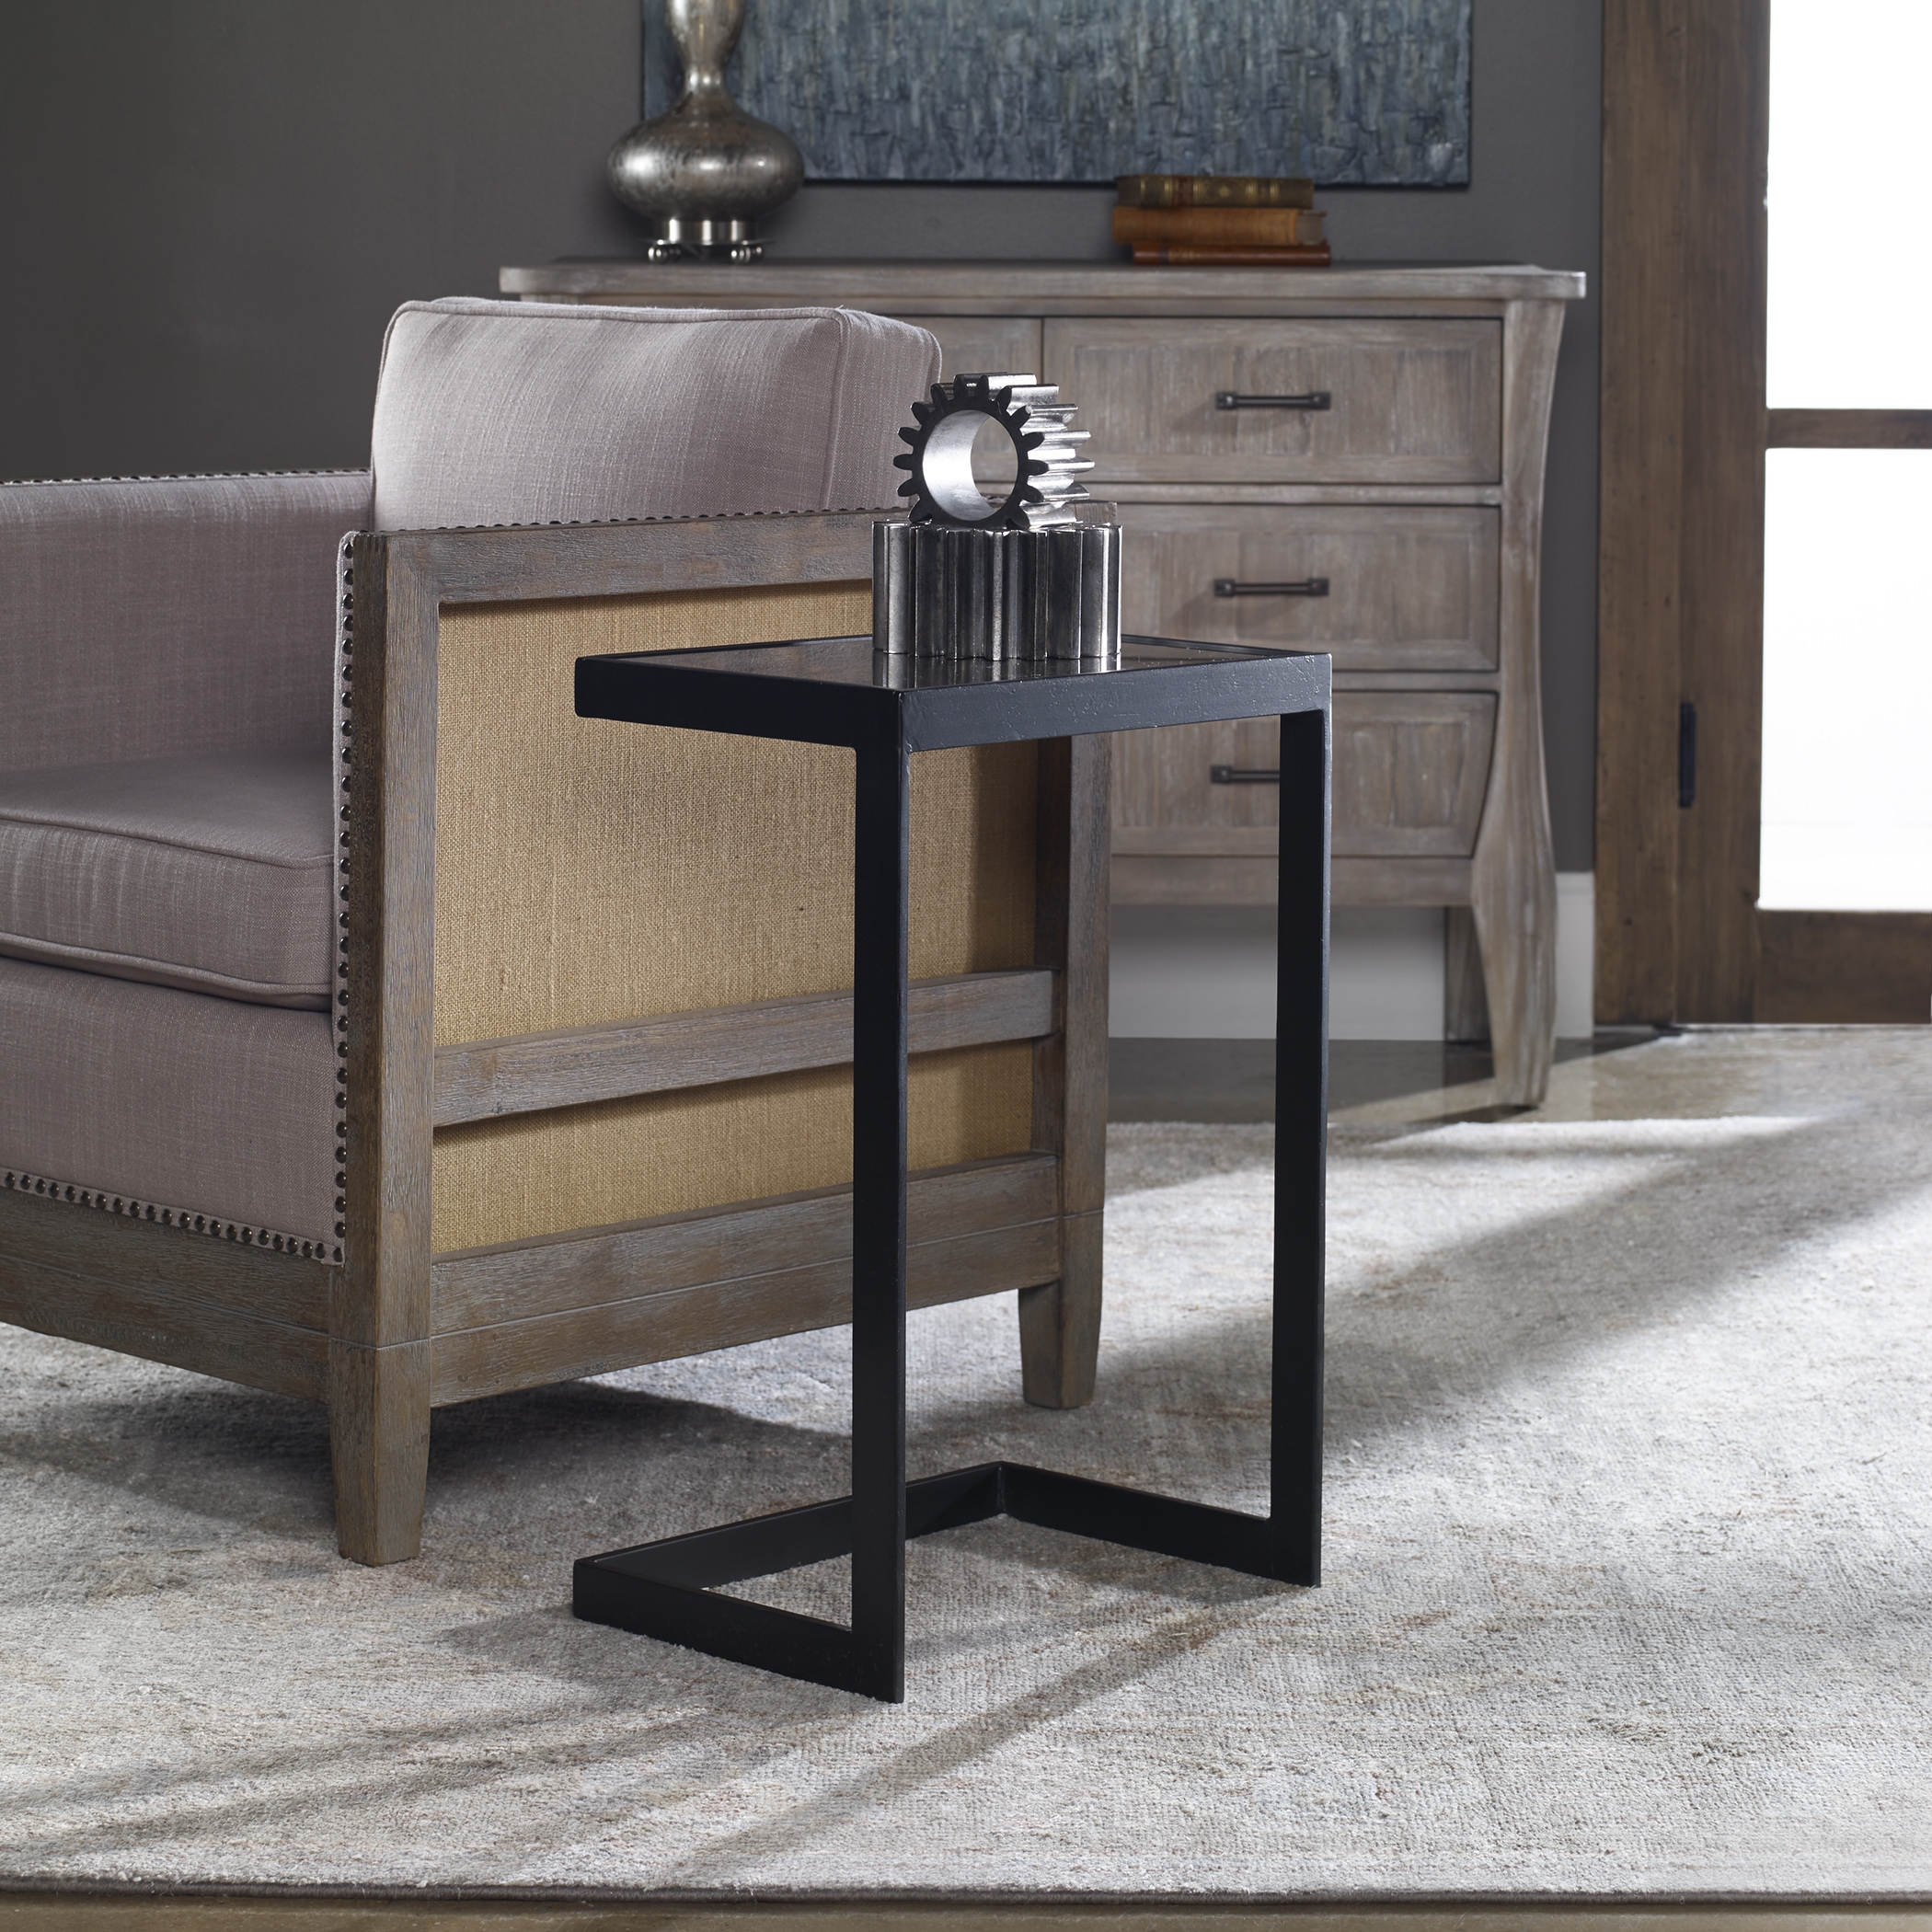 Windell Cantilever Side Table - Image 4